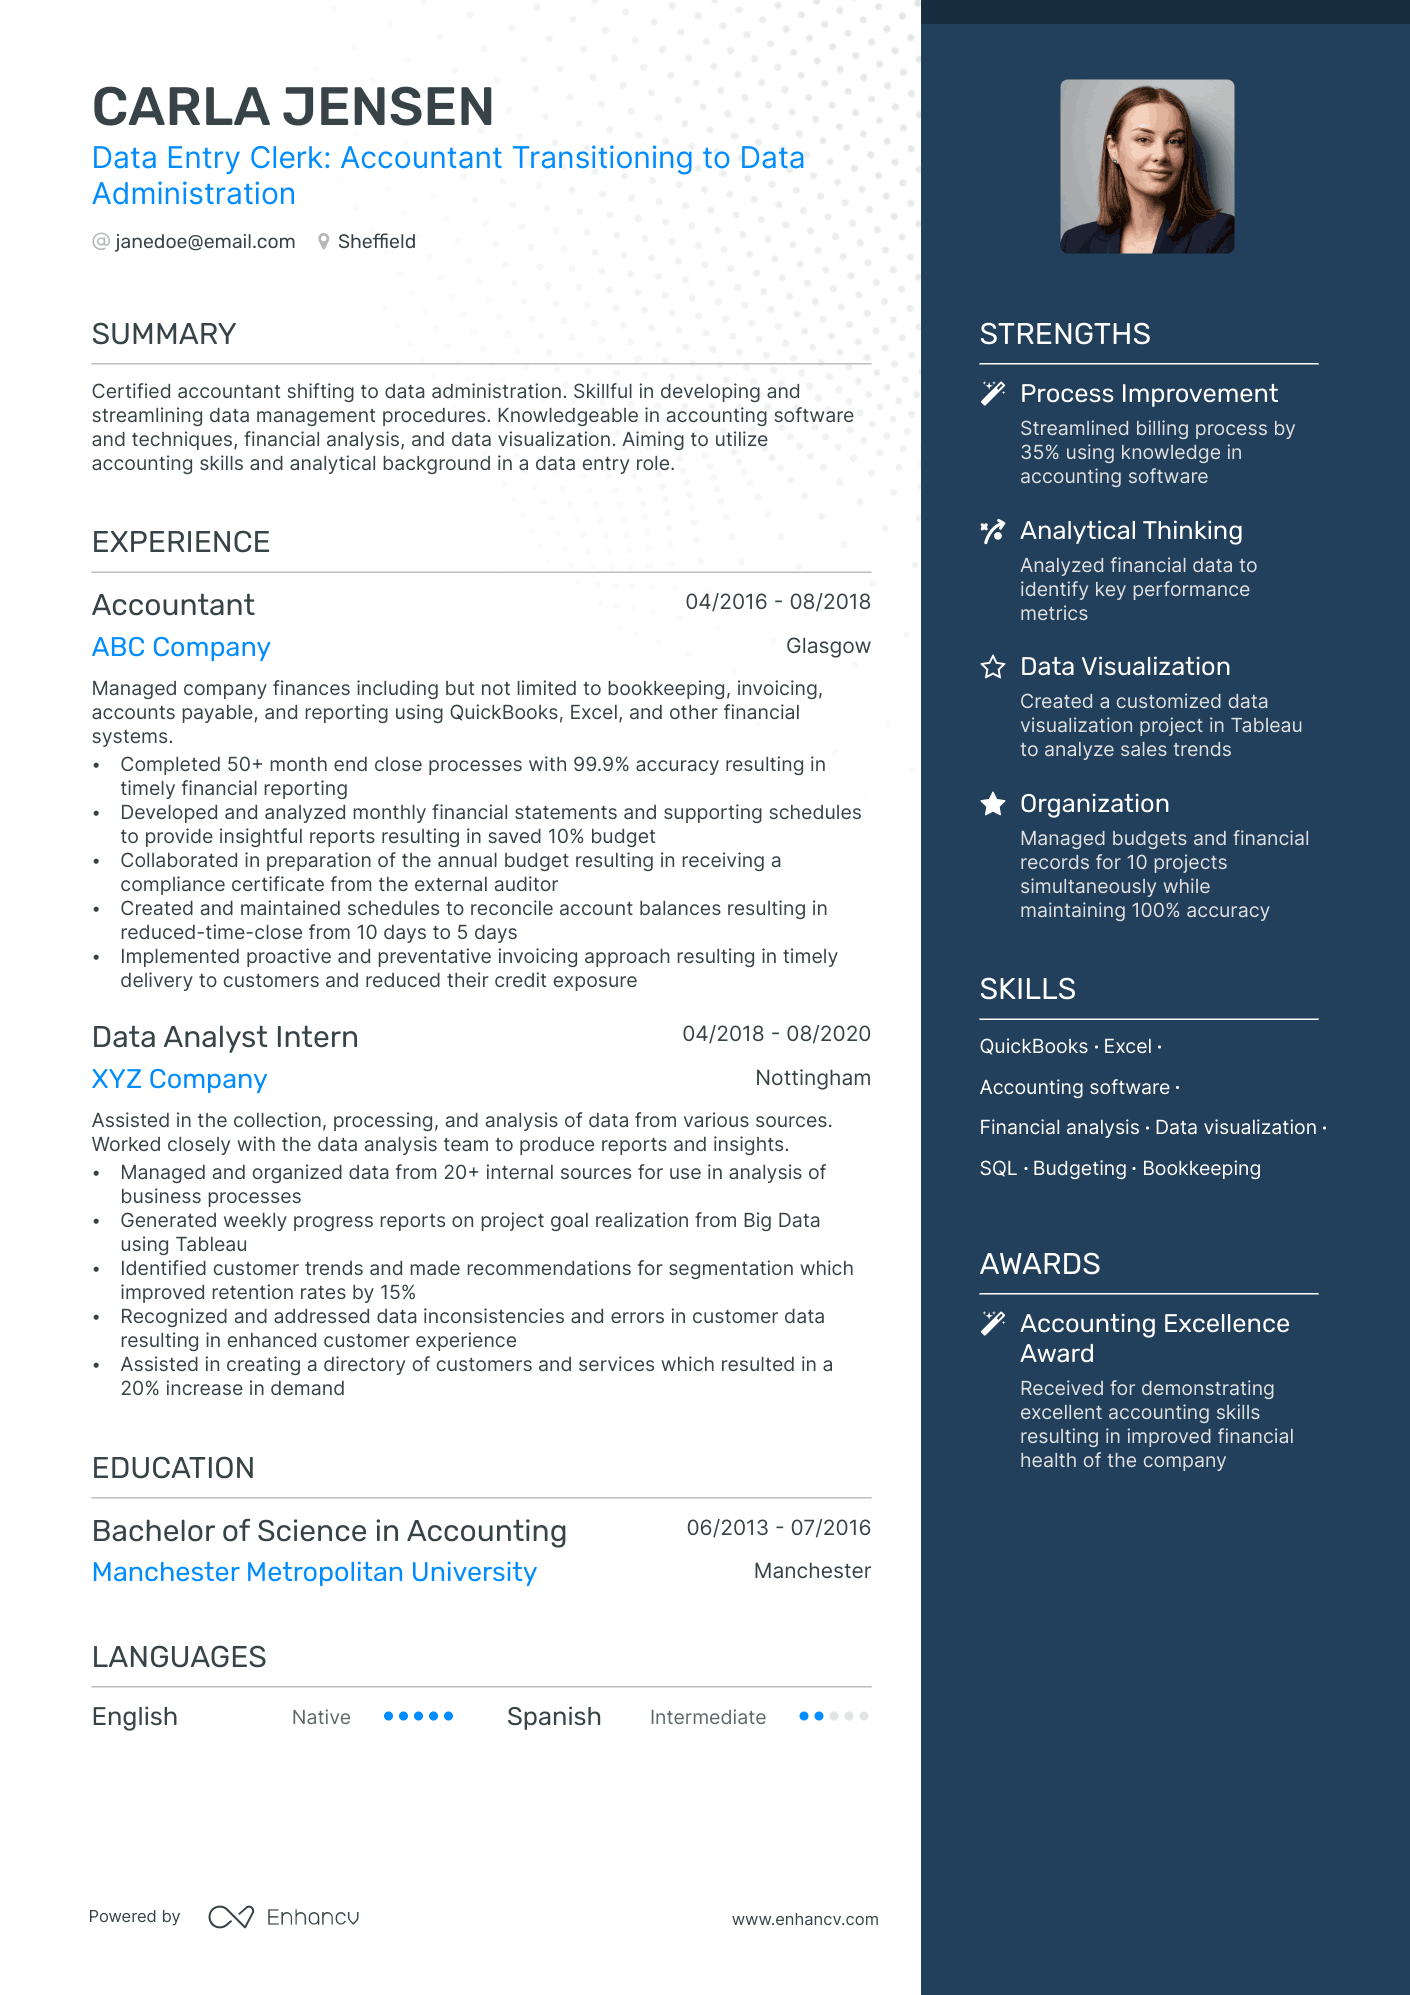 Data Entry Clerk: Accountant Transitioning to Data Administration CV example